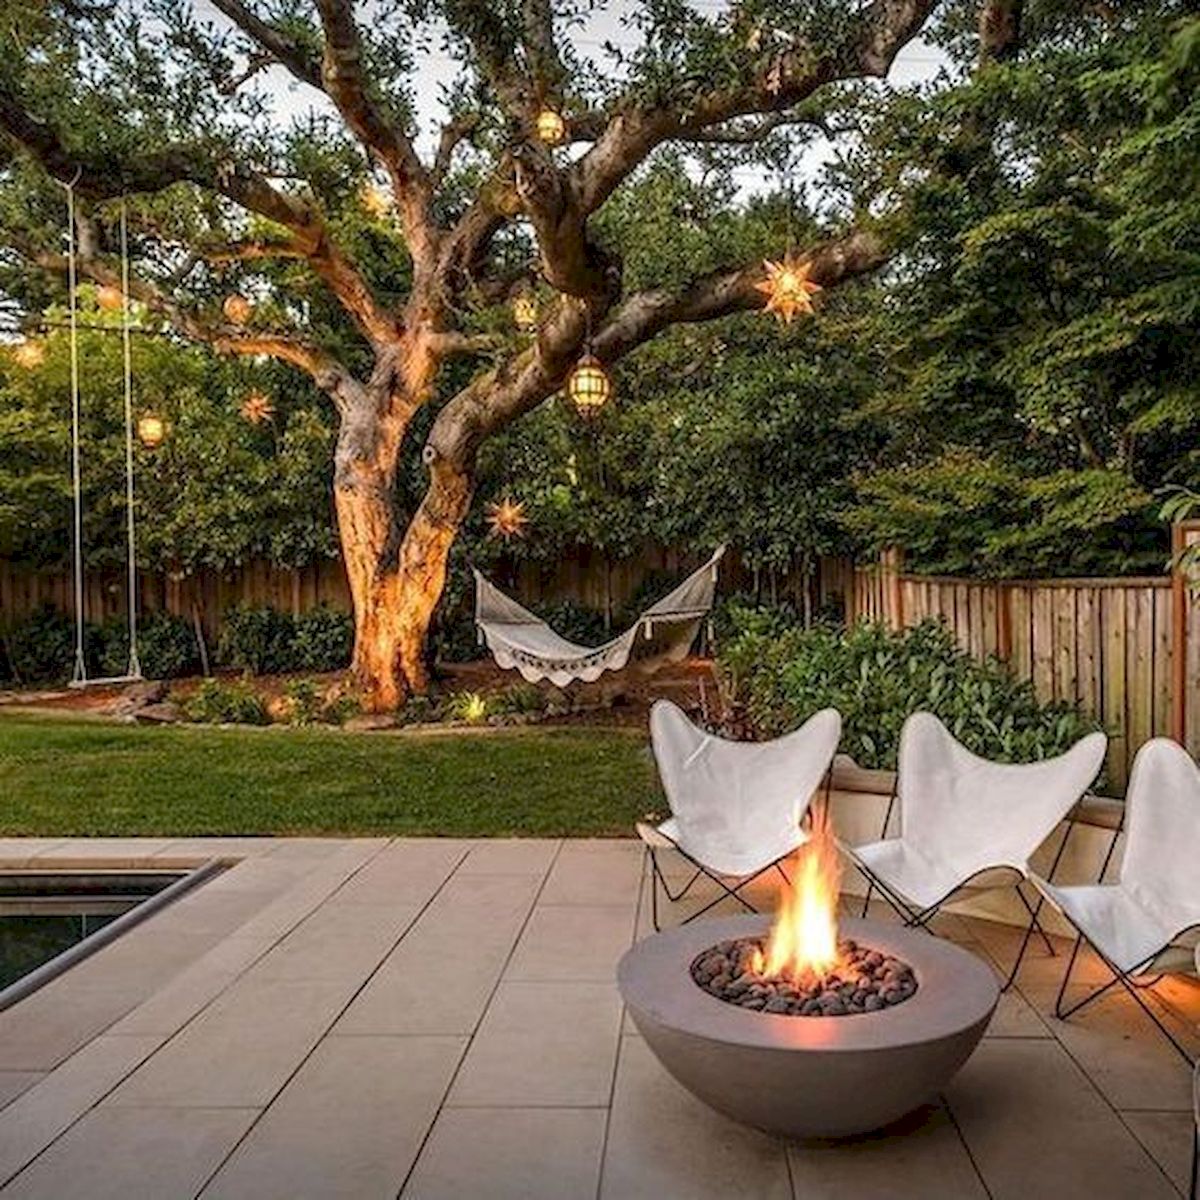 A garden with a fire pit and a tree.